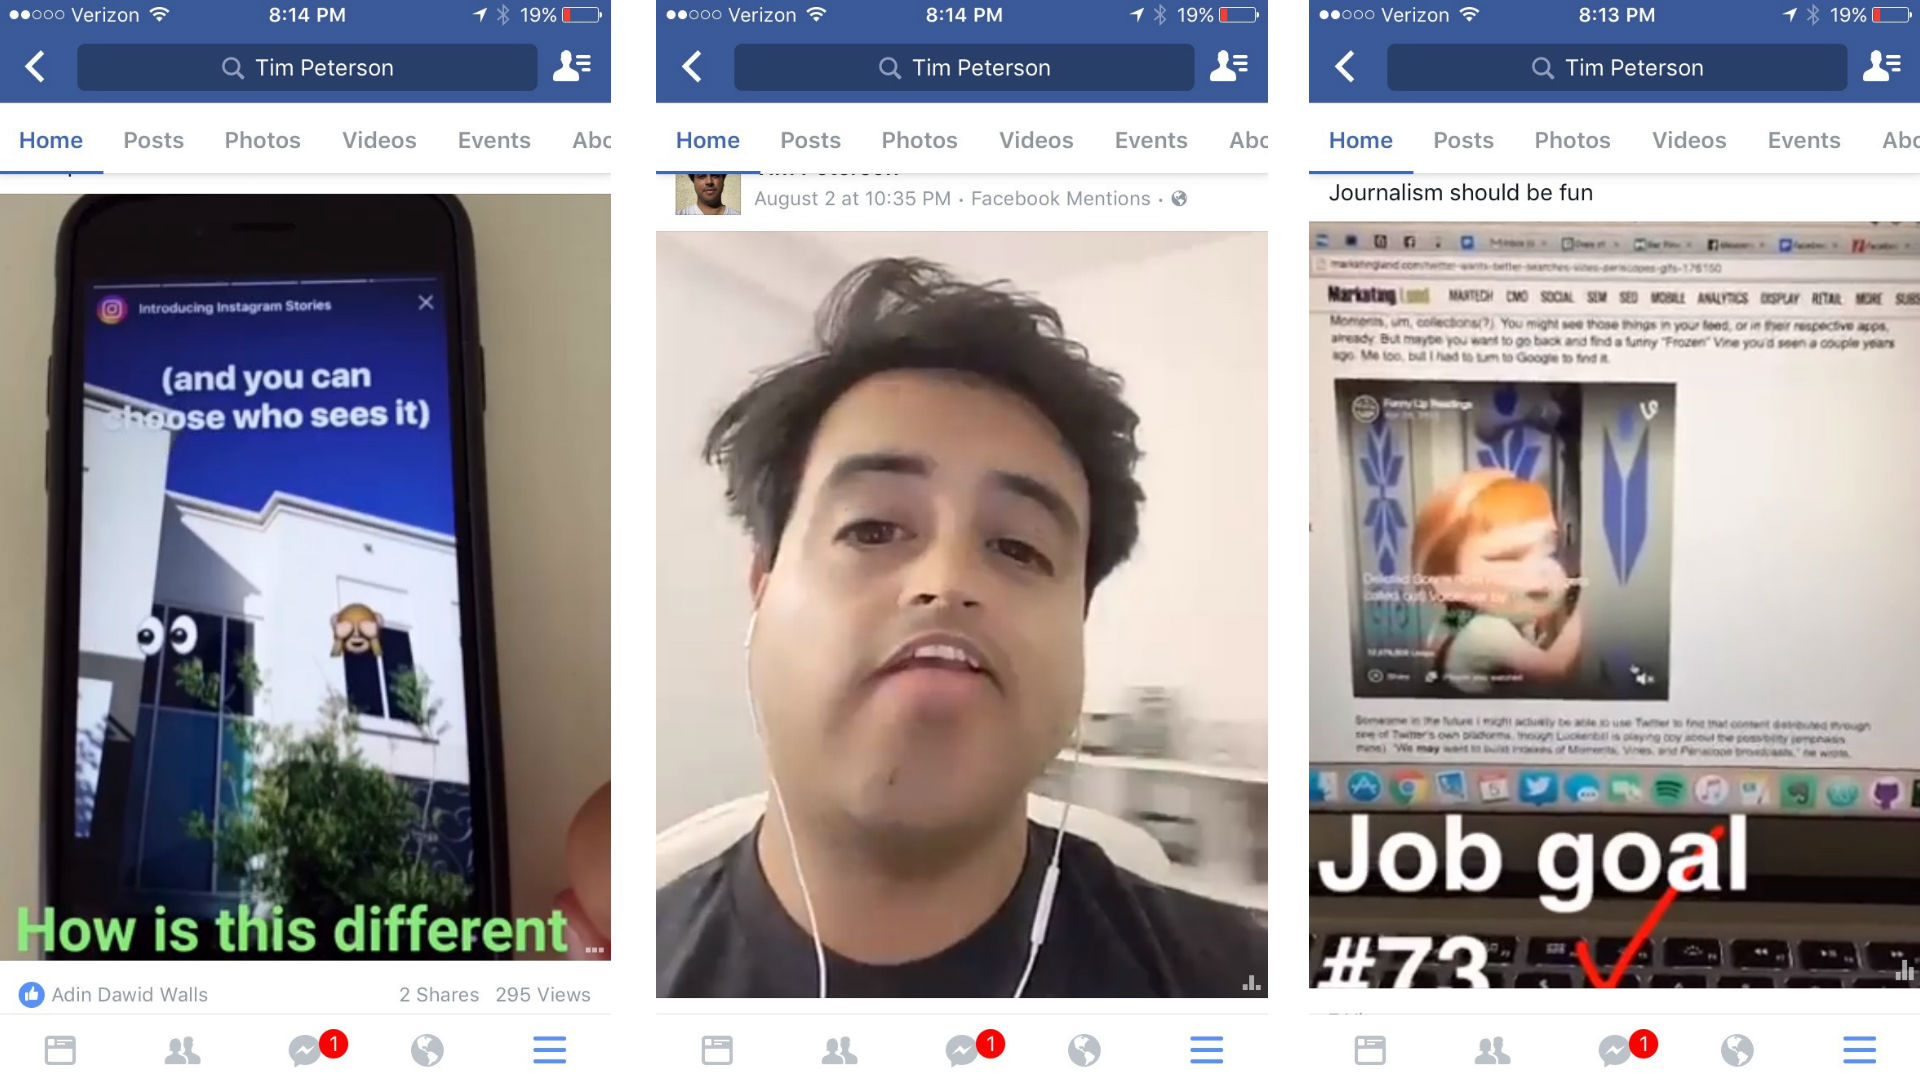 Vertical videos will now appear vertically in Facebook's mobile news feed, but still somewhat cropped.